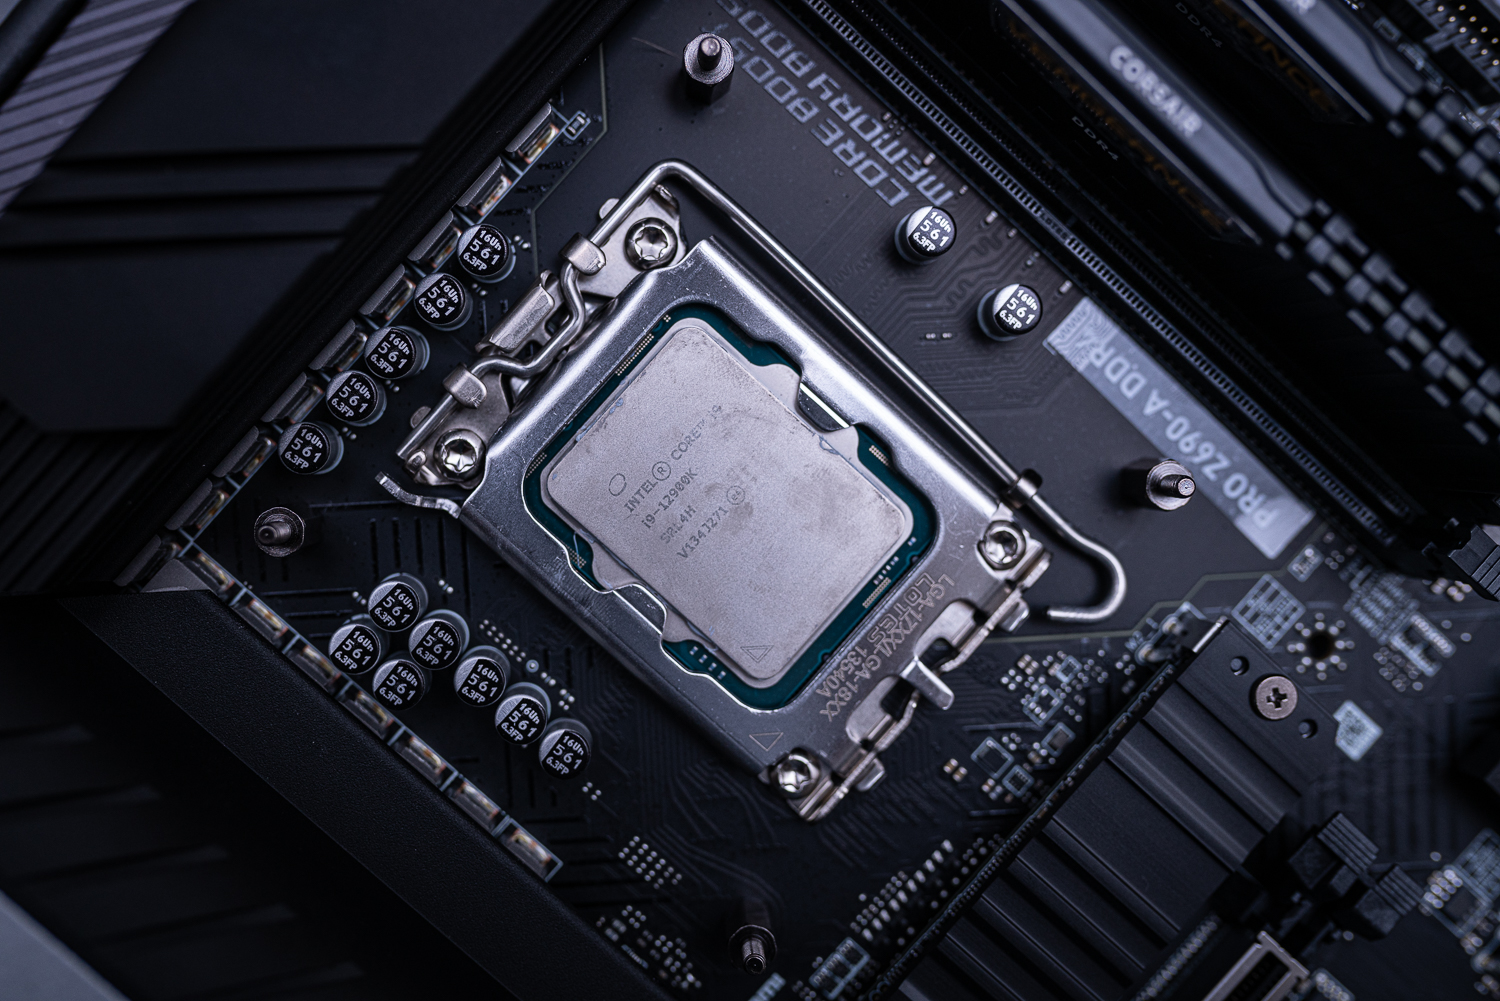 Intel's $2,000 Core i9 CPU will launch on September 25, with the